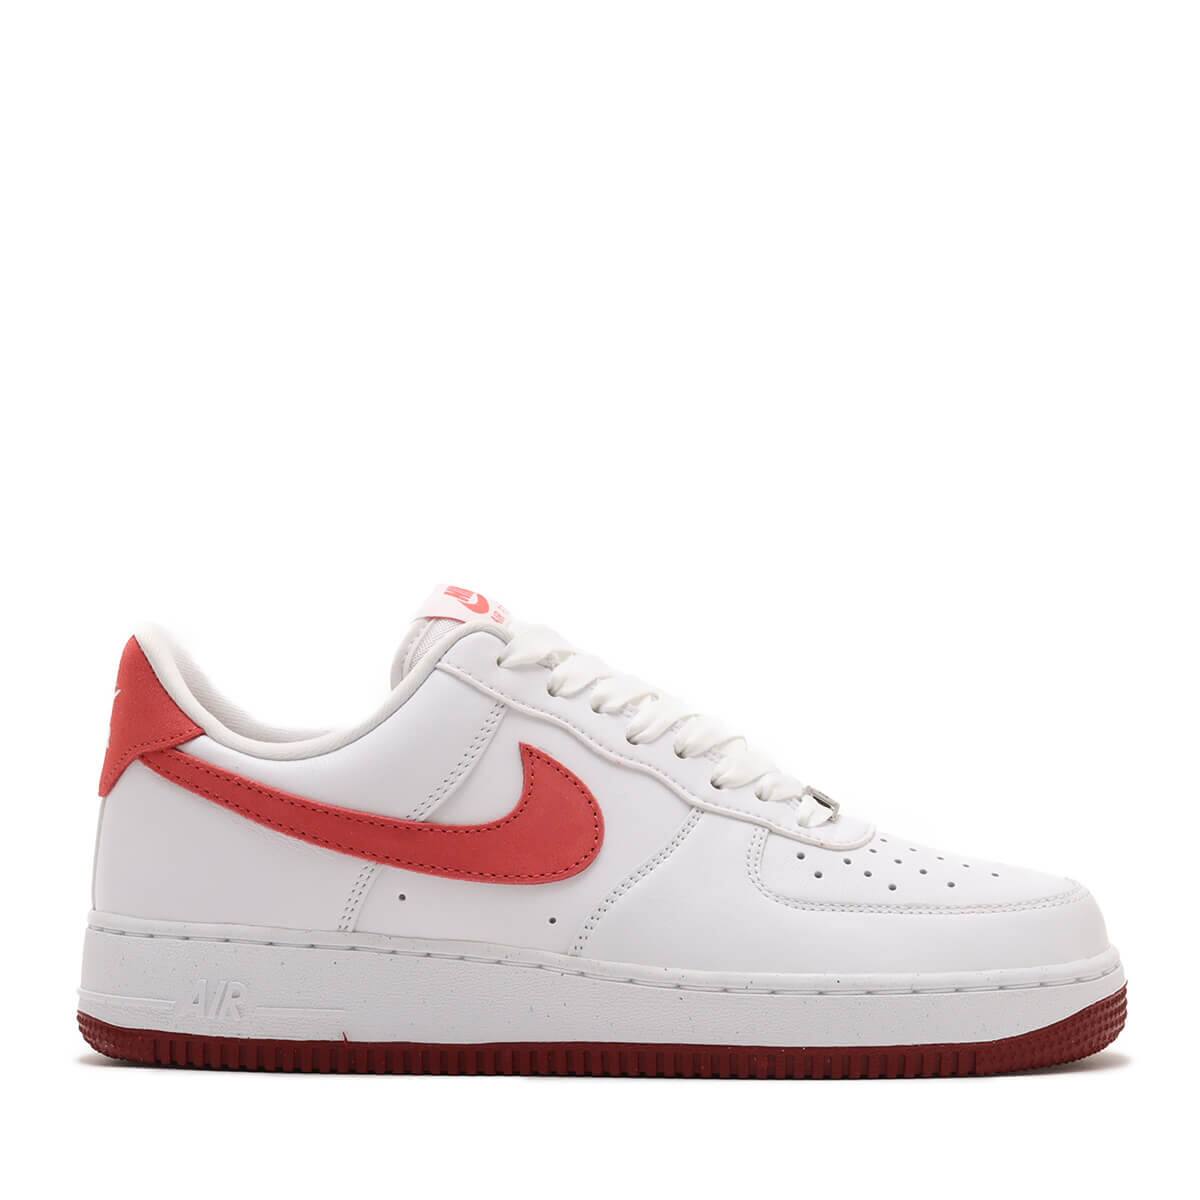 NIKE W AIR FORCE 1 '07 WHITE/ADOBE-TEAM RED-DRAGON RED 24SP-I